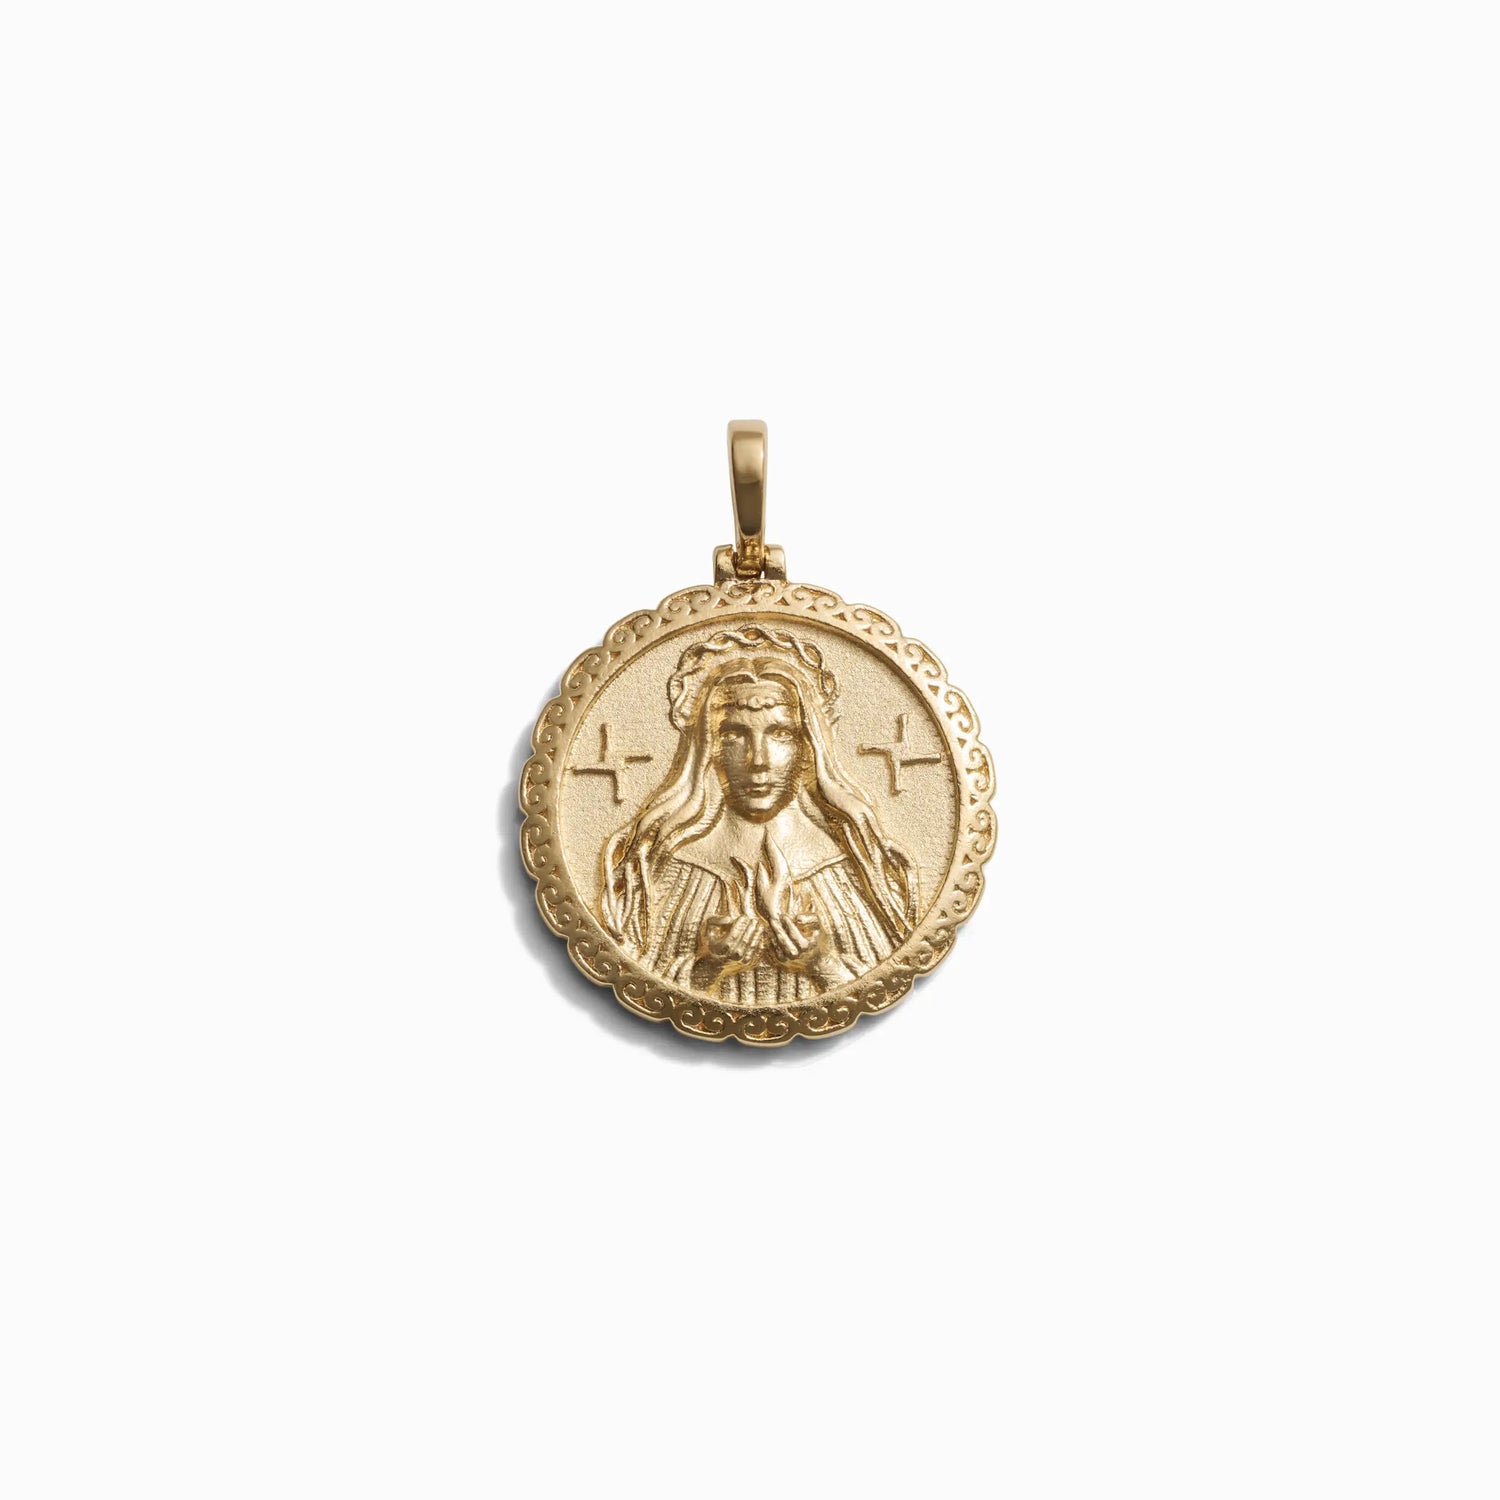 Product image of The Brigid Pendant by Awe Inspired in yellow gold on a white background.